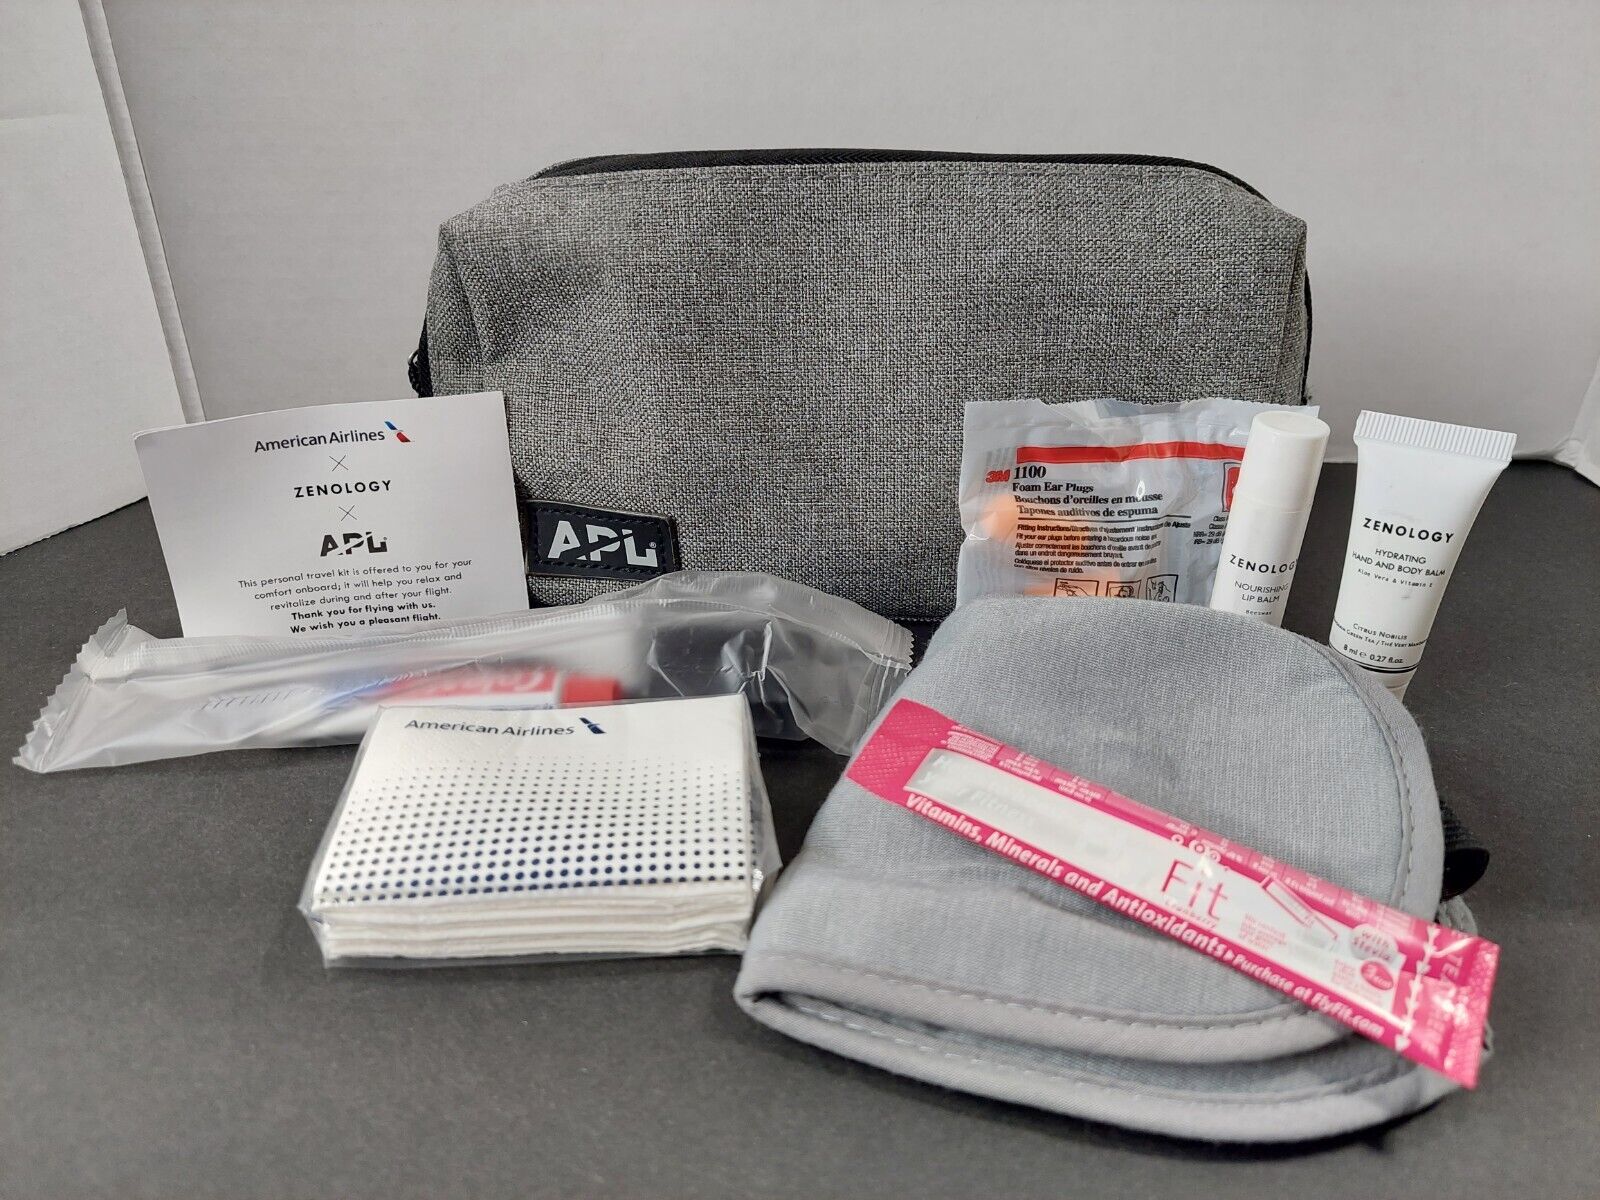 American Airlines x APL Business Class Amenity Kit - Grey 